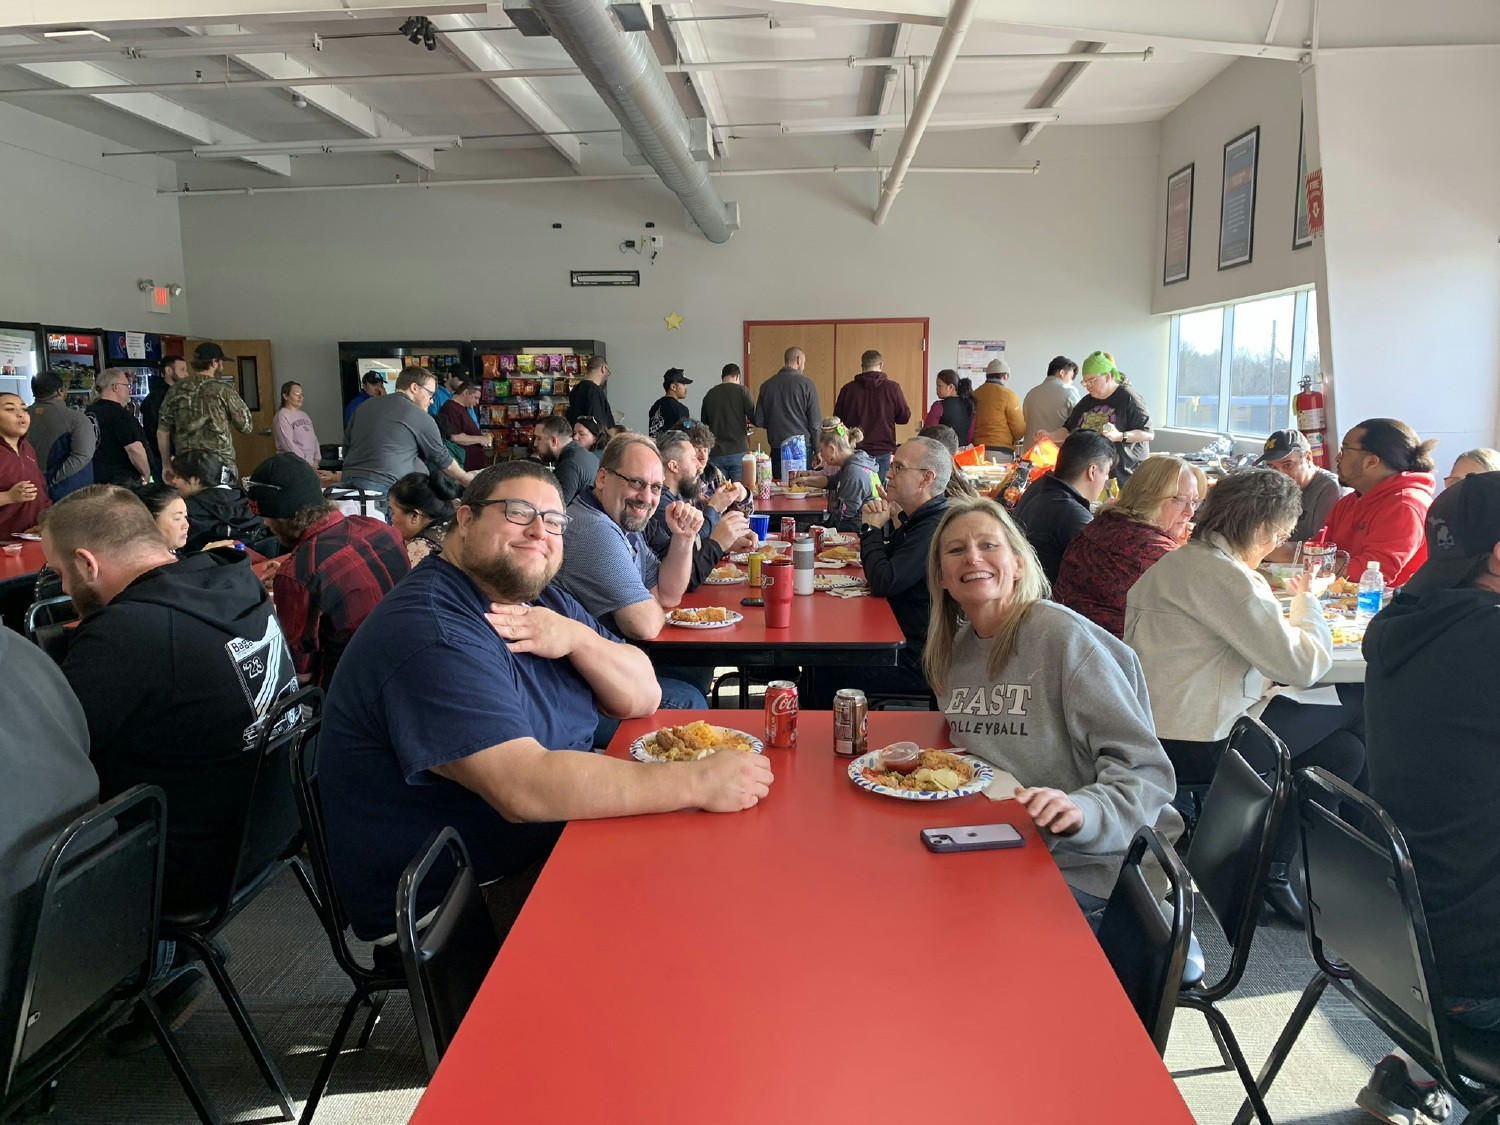 We held a company-wide potluck where everyone was able to share and have lunch together.